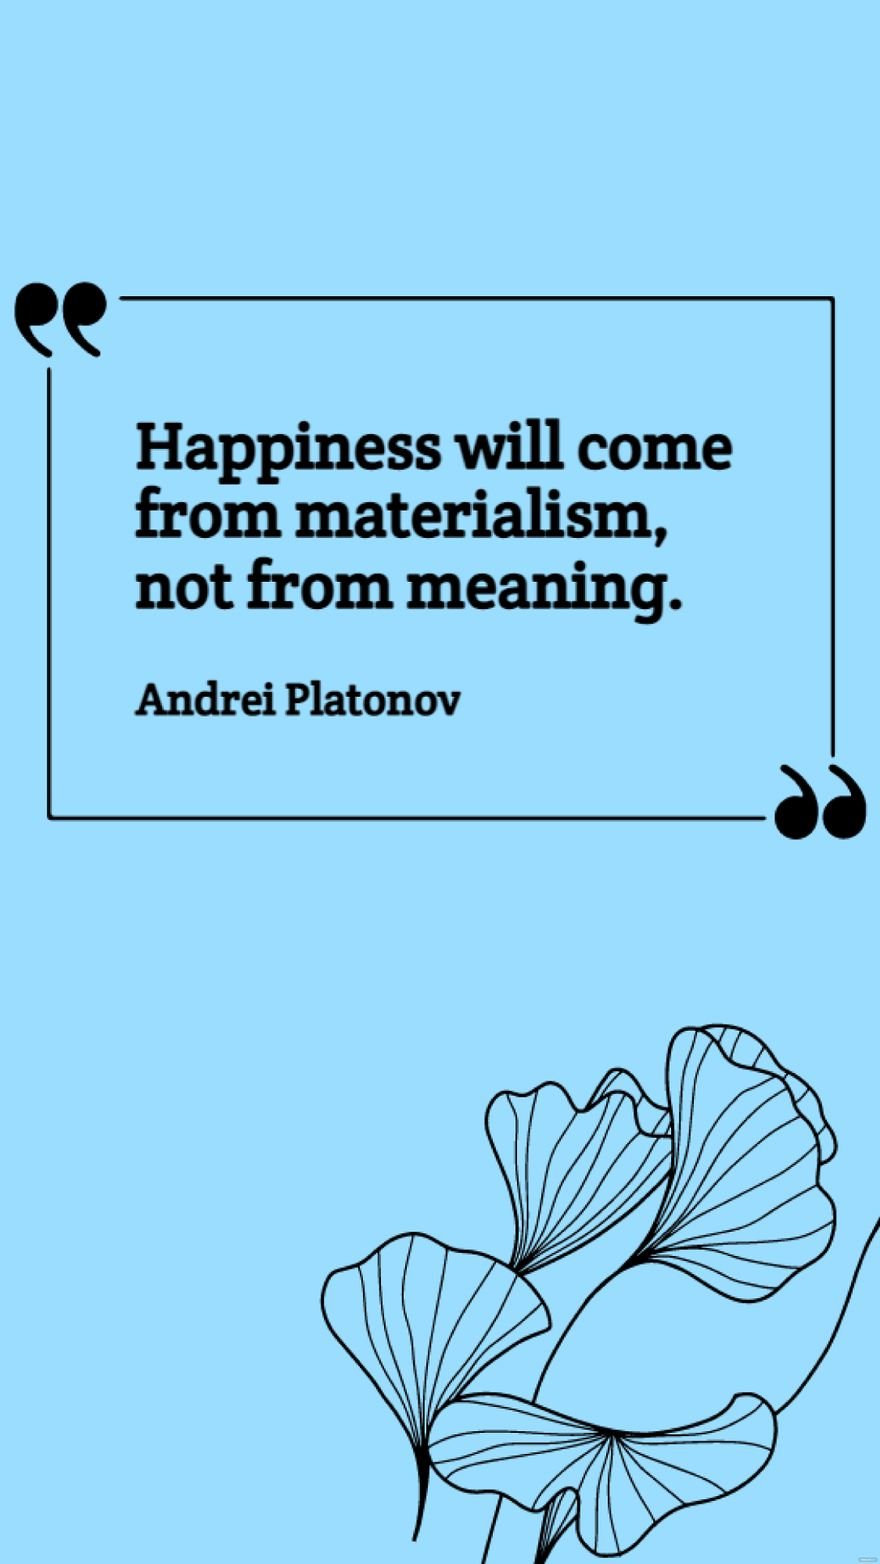 Free Andrei Platonov - Happiness will come from materialism, not from meaning.